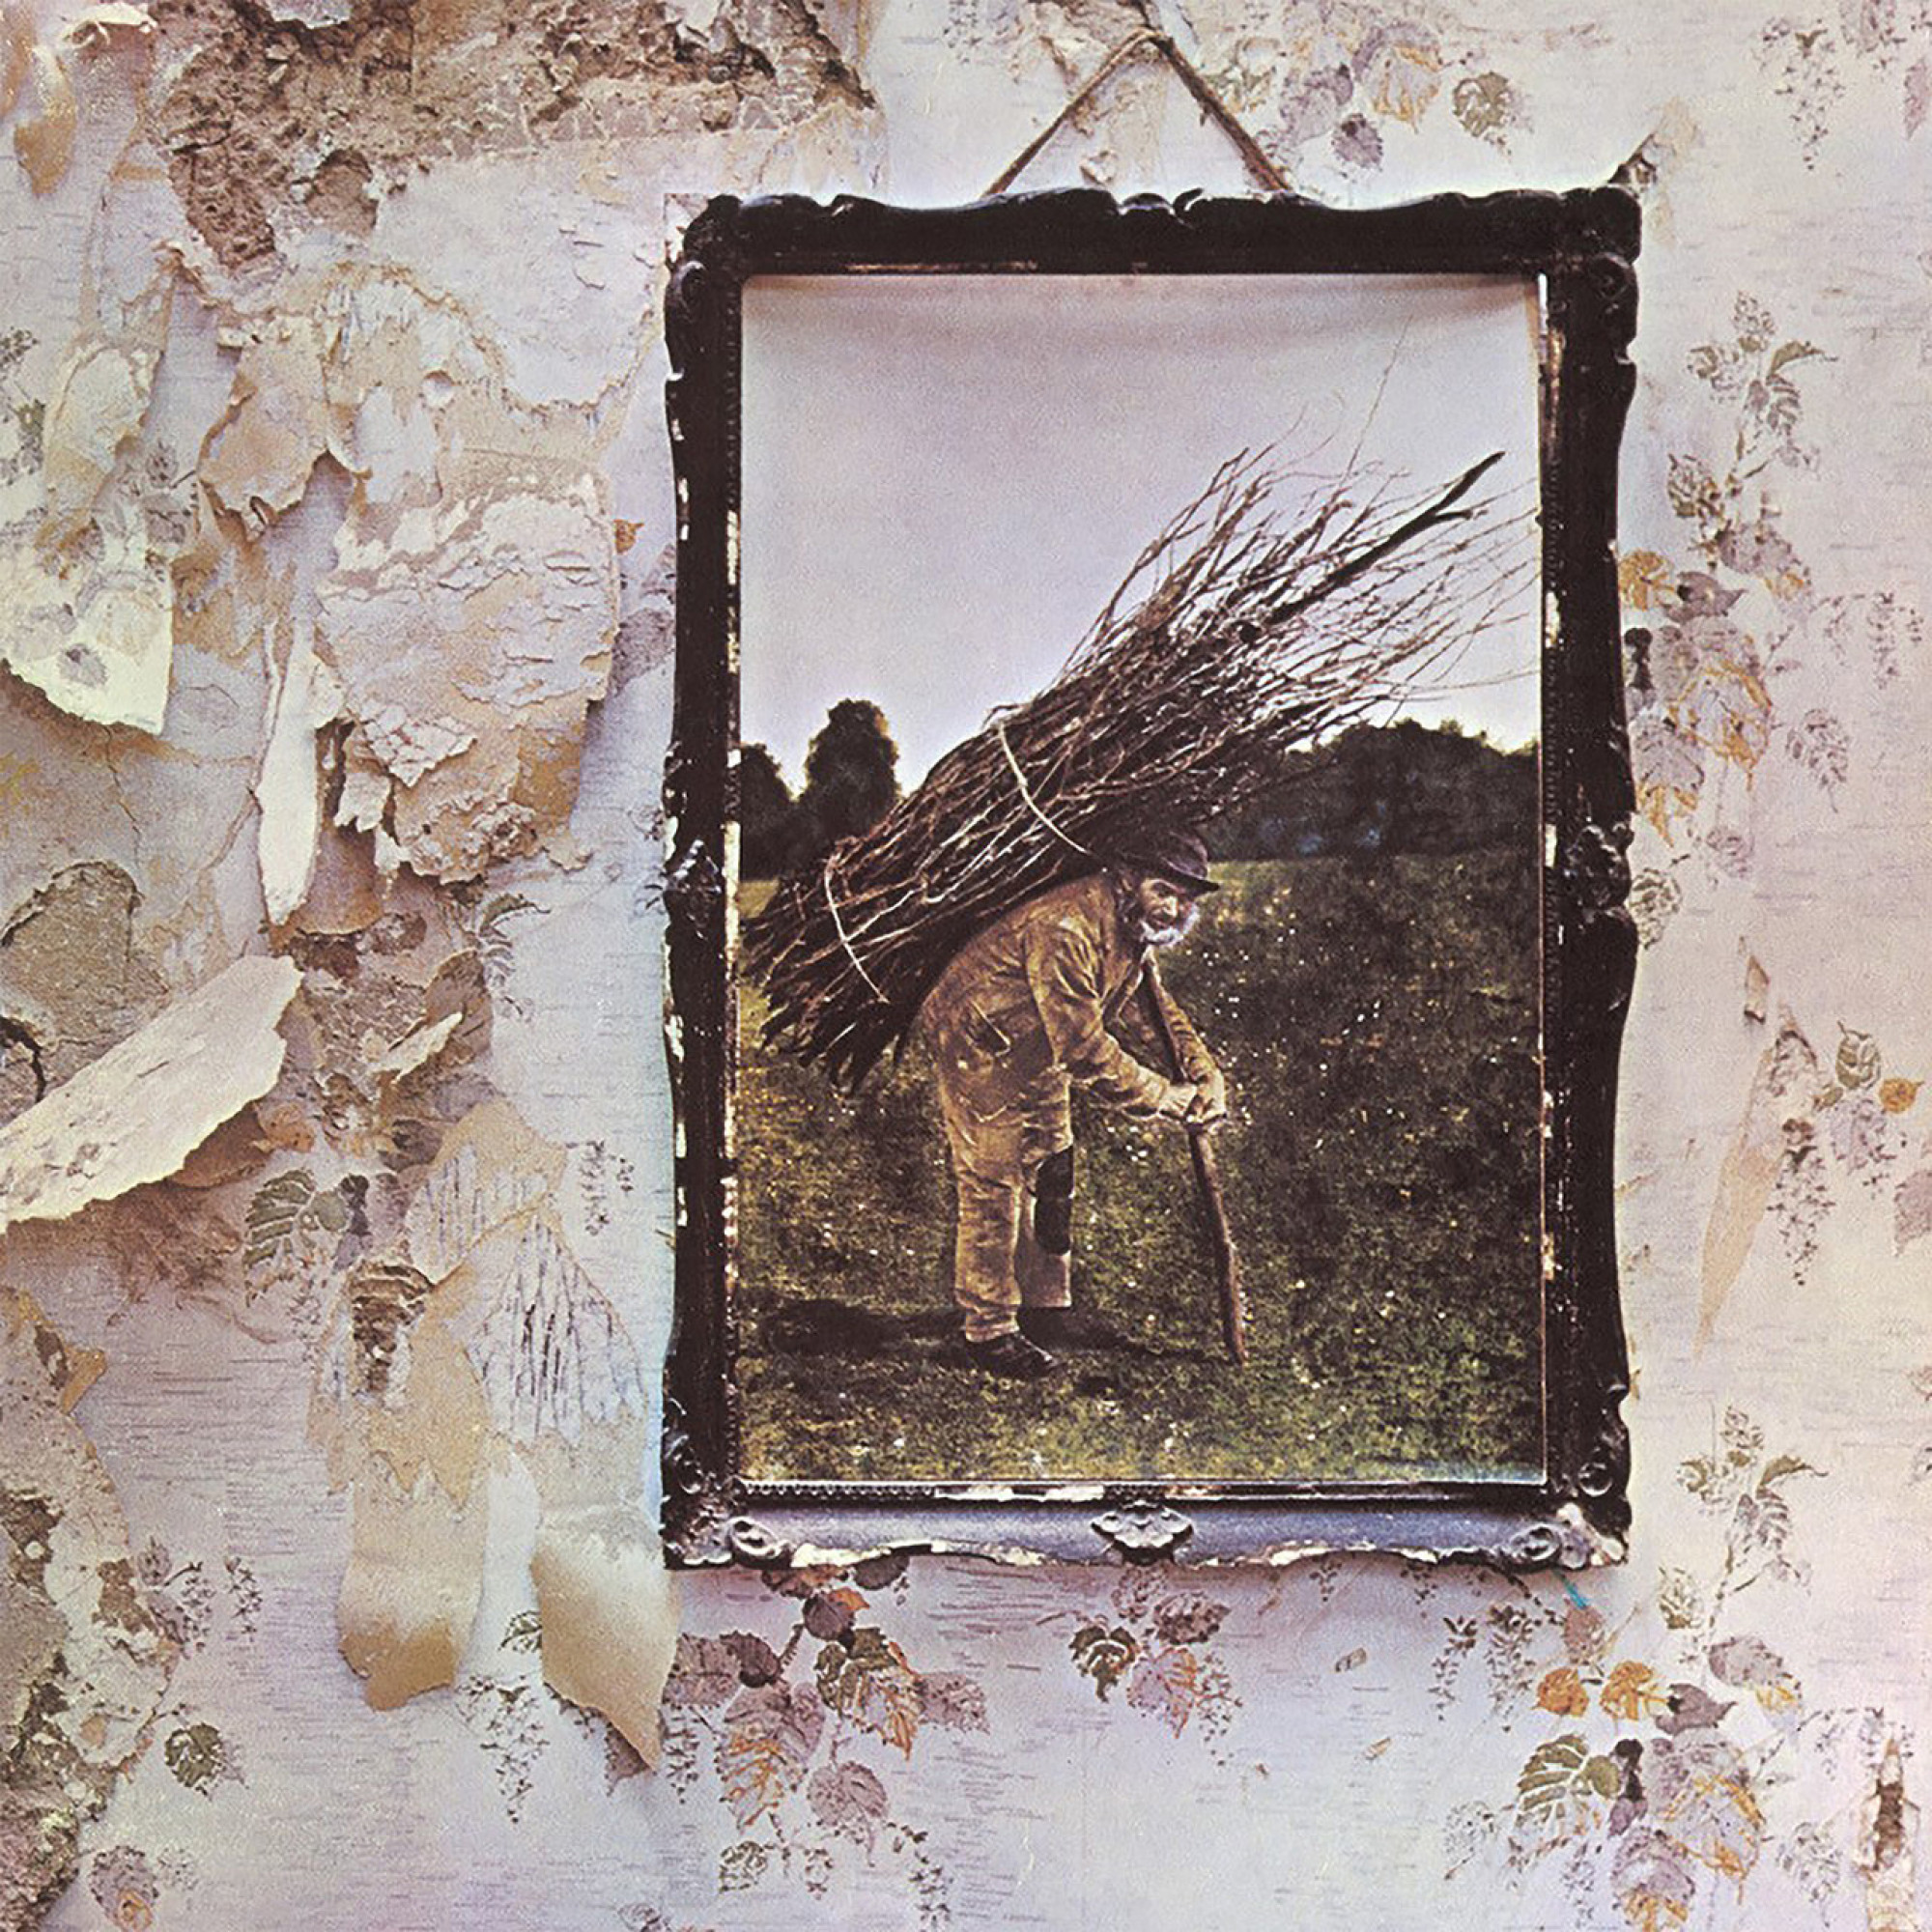 Led Zeppelin - Led Zeppelin IV — buy vinyl records and accessories